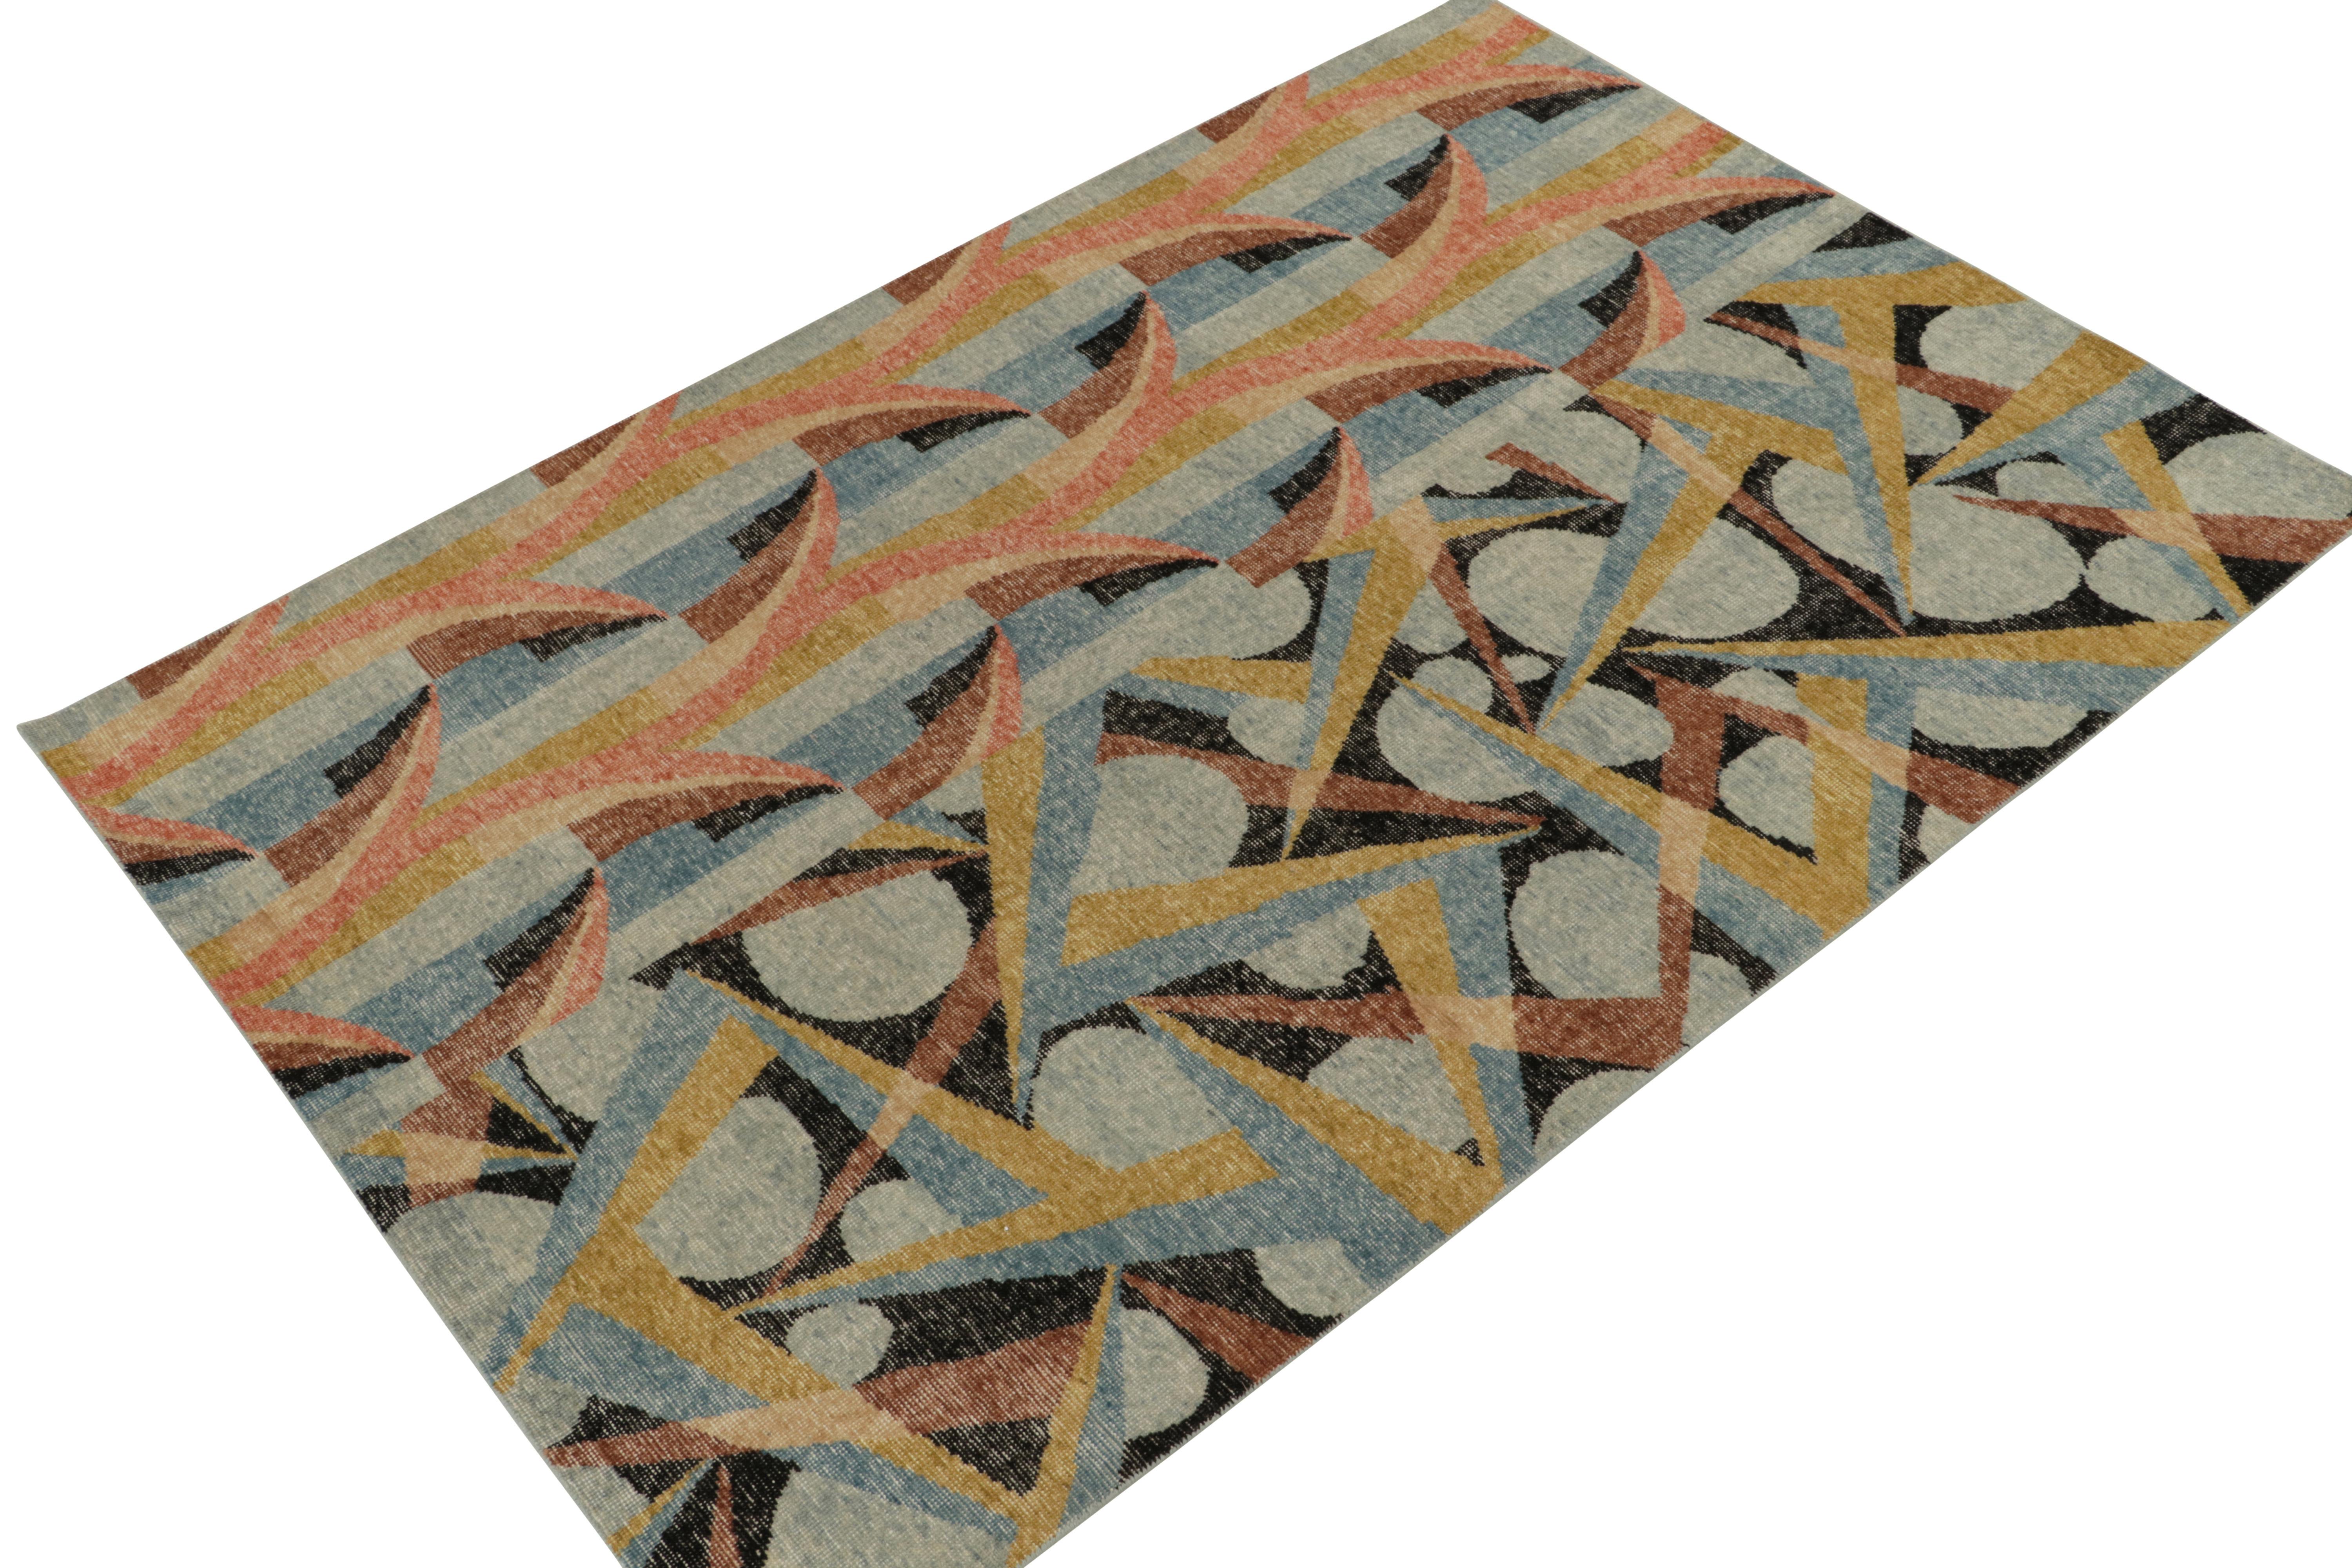 A scintillating 6x9 hand-knotted wool rug from Rug & Kilim’s Homage Collection; a bold textural encyclopedia of patterns and styles. 

On the Design: This creation marks a bold take on Art Deco through a mid-century modern lens in a vivid, lively